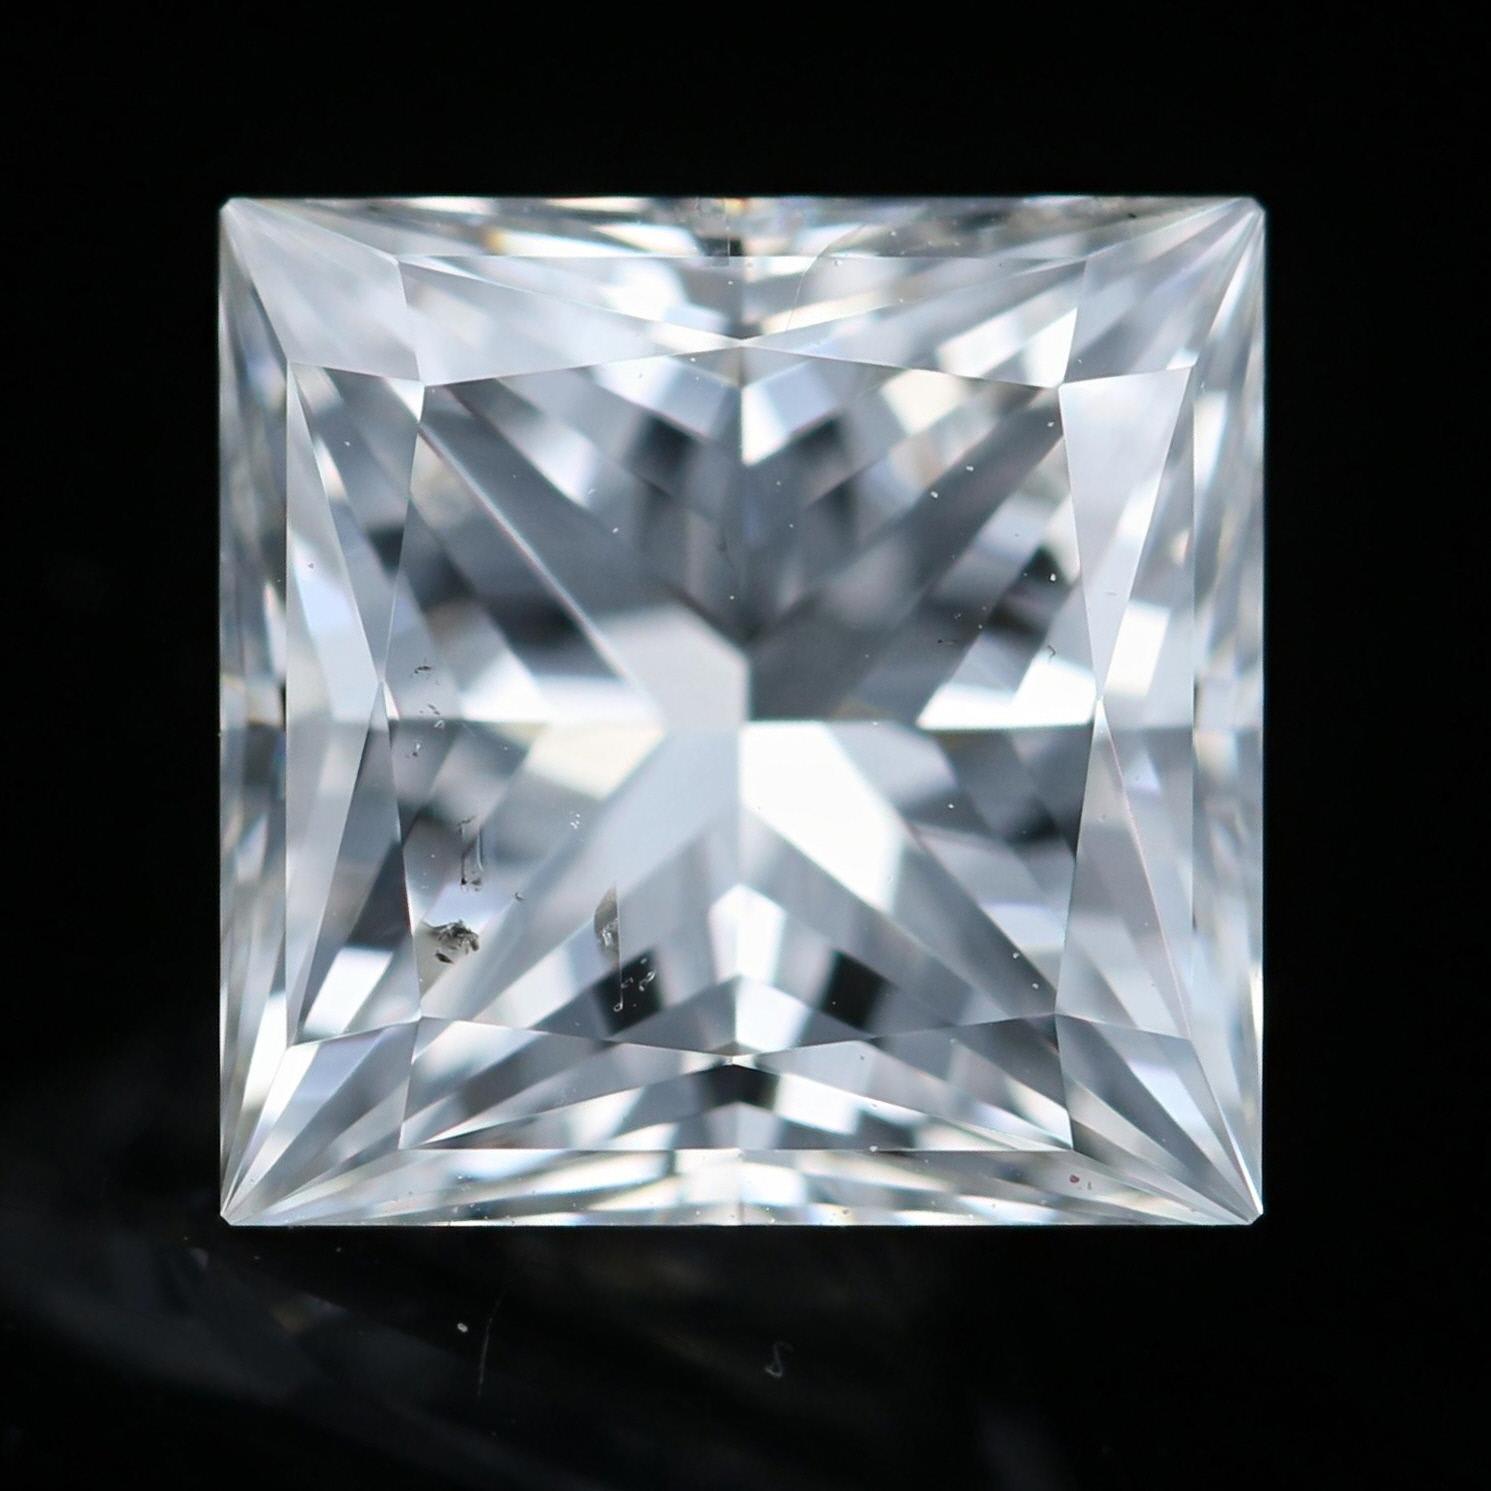 Weight: 1.49ct
Cut: Princess
Color: G
Clarity: SI2 
Dimensions (mm): 6.27 x 6.19 x 4.54 

GIA Report Number: 6204964182

Condition: New  

Please check out the enlarged pictures.

Thank you for taking the time to read our description. If you have